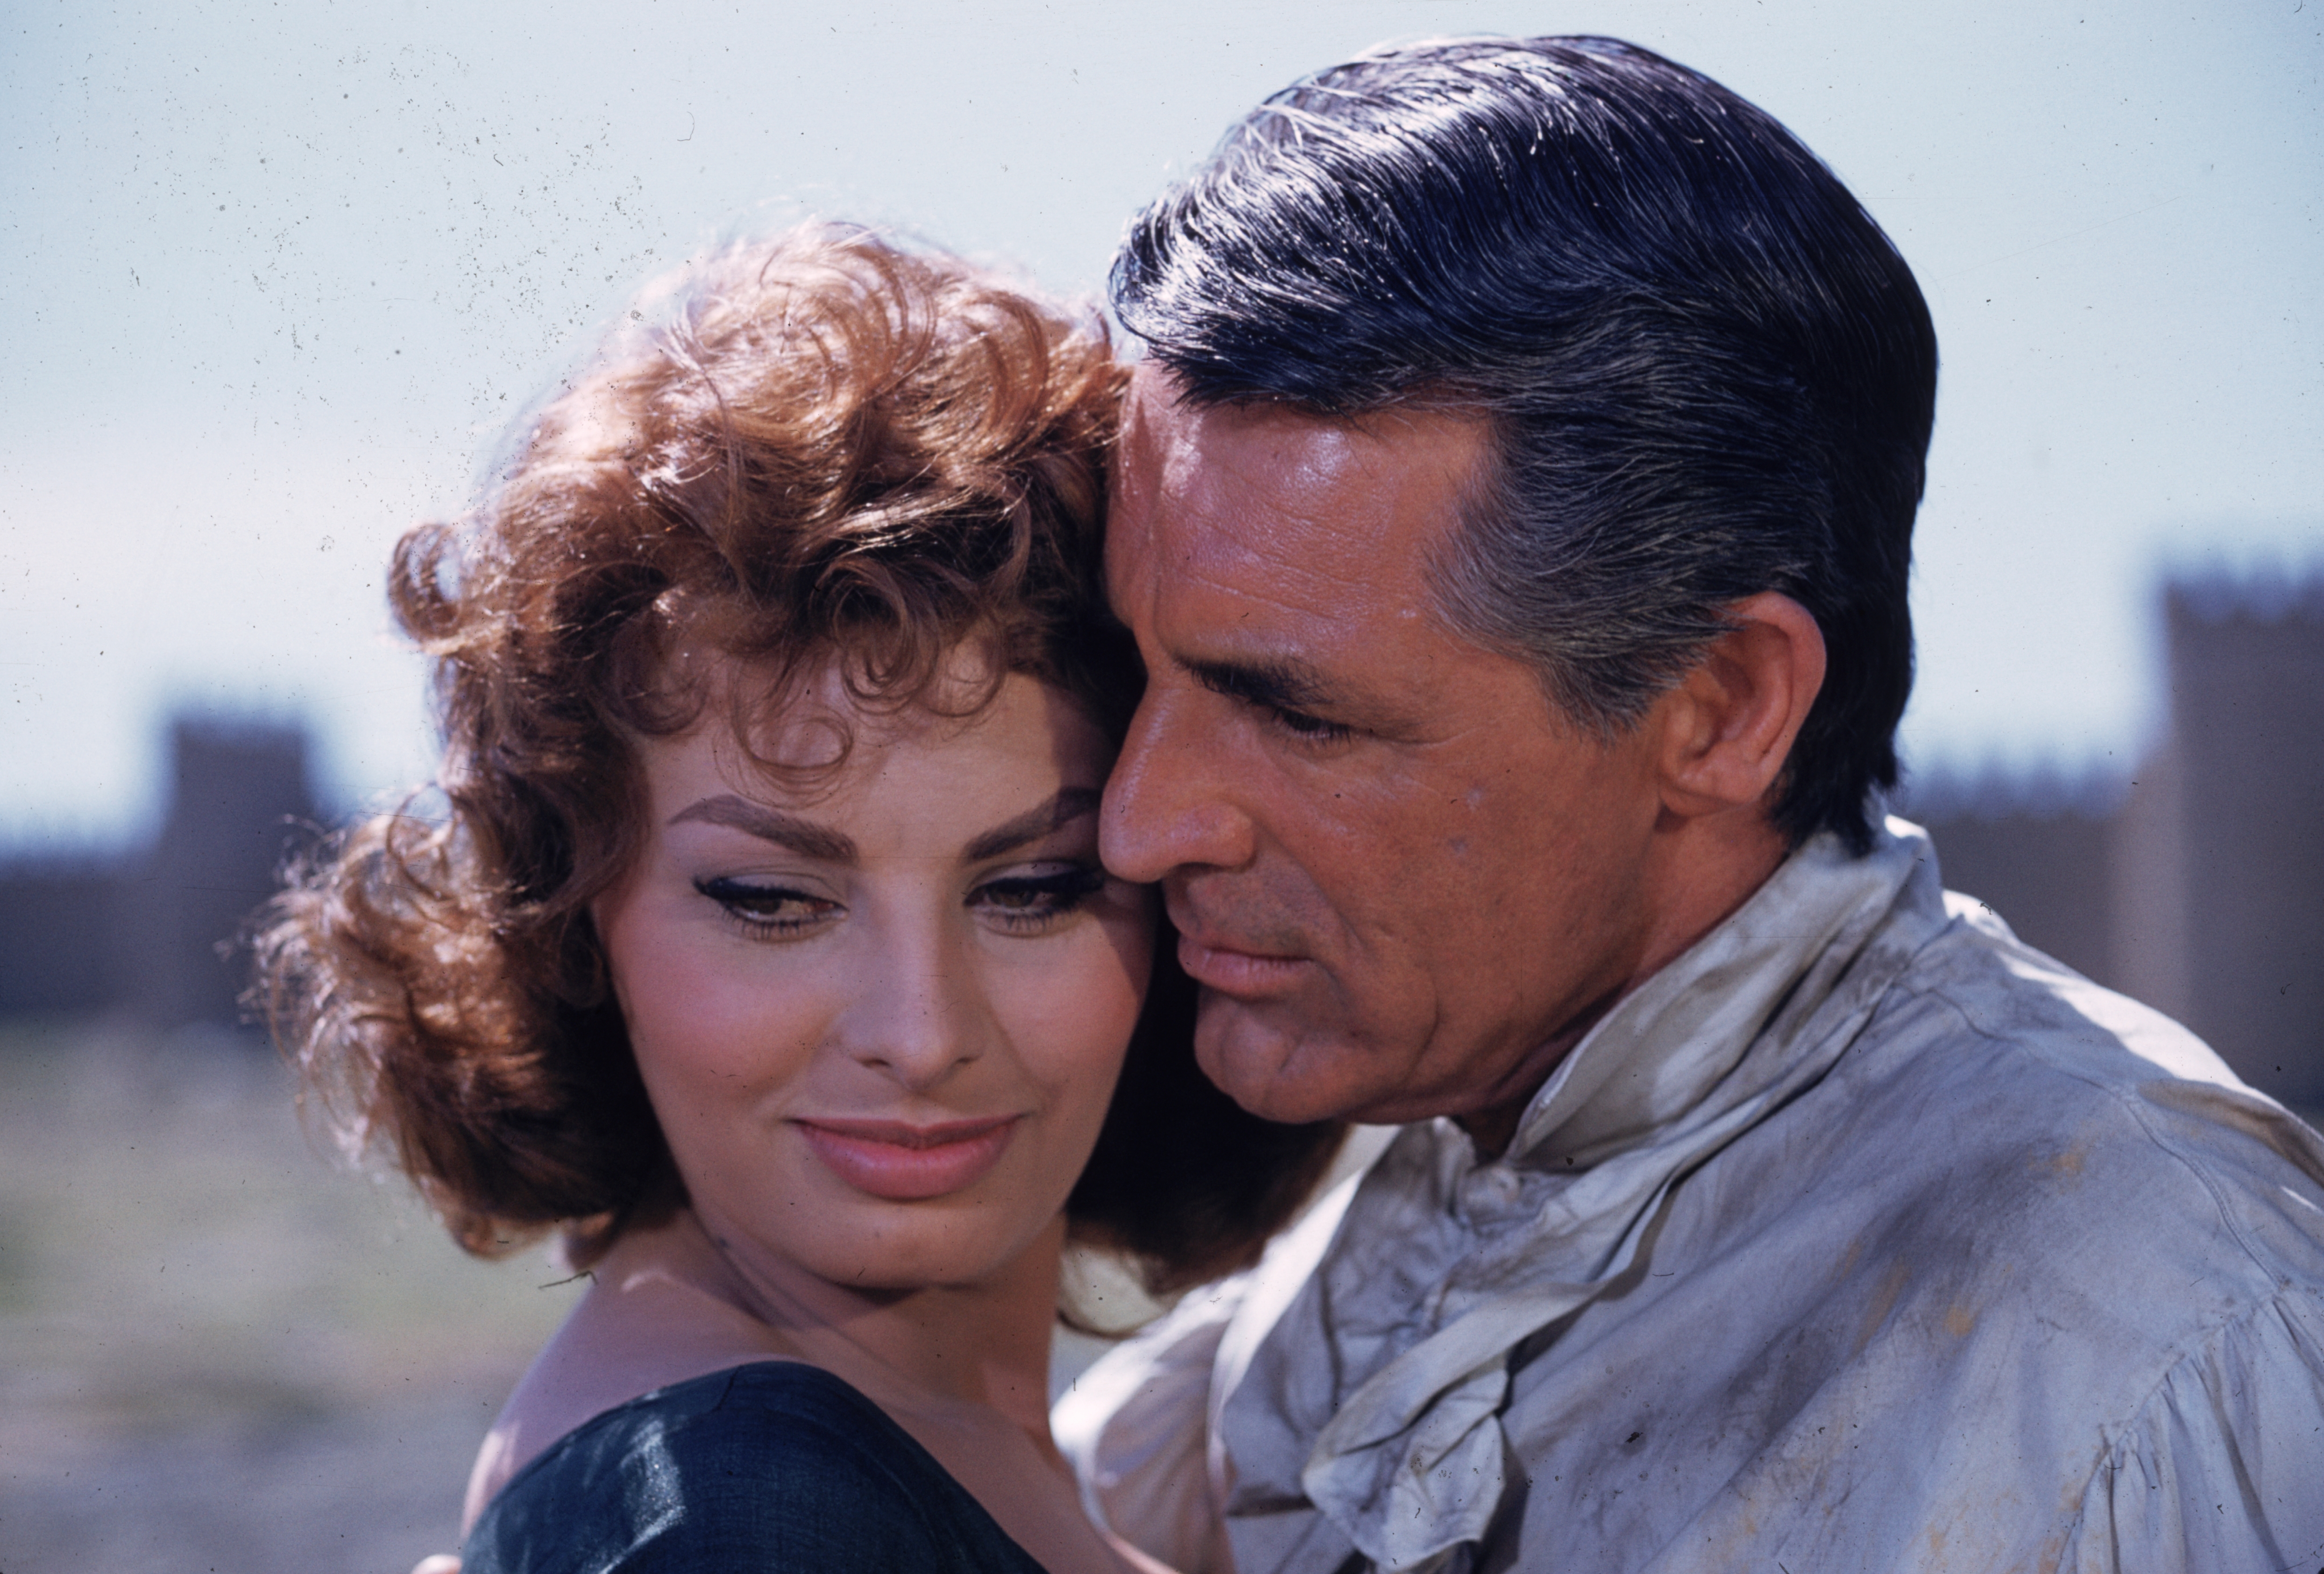 Sophia Loren and Cary Grant on the set of "The Pride and the Passion" in 1957 | Source: Getty Images